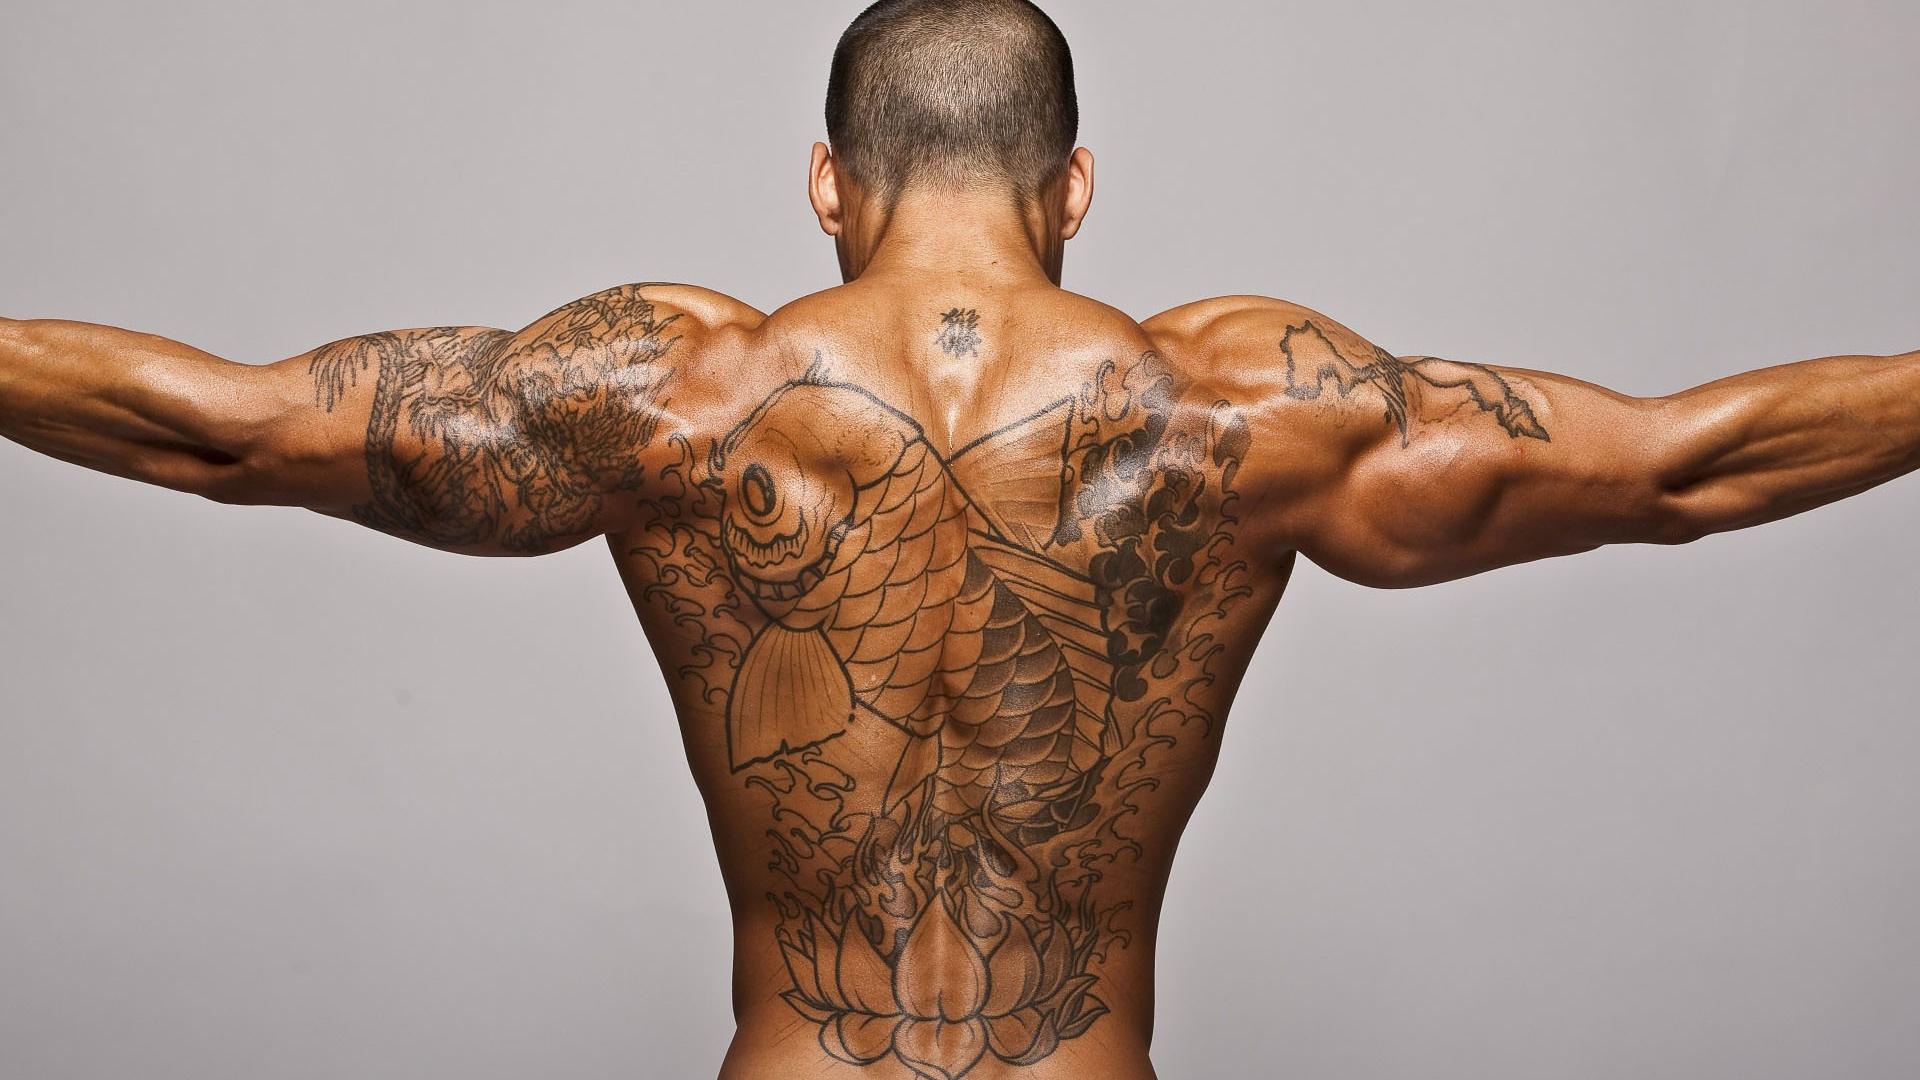 11 Awesome And Coolest Tattoo Ideas For Men